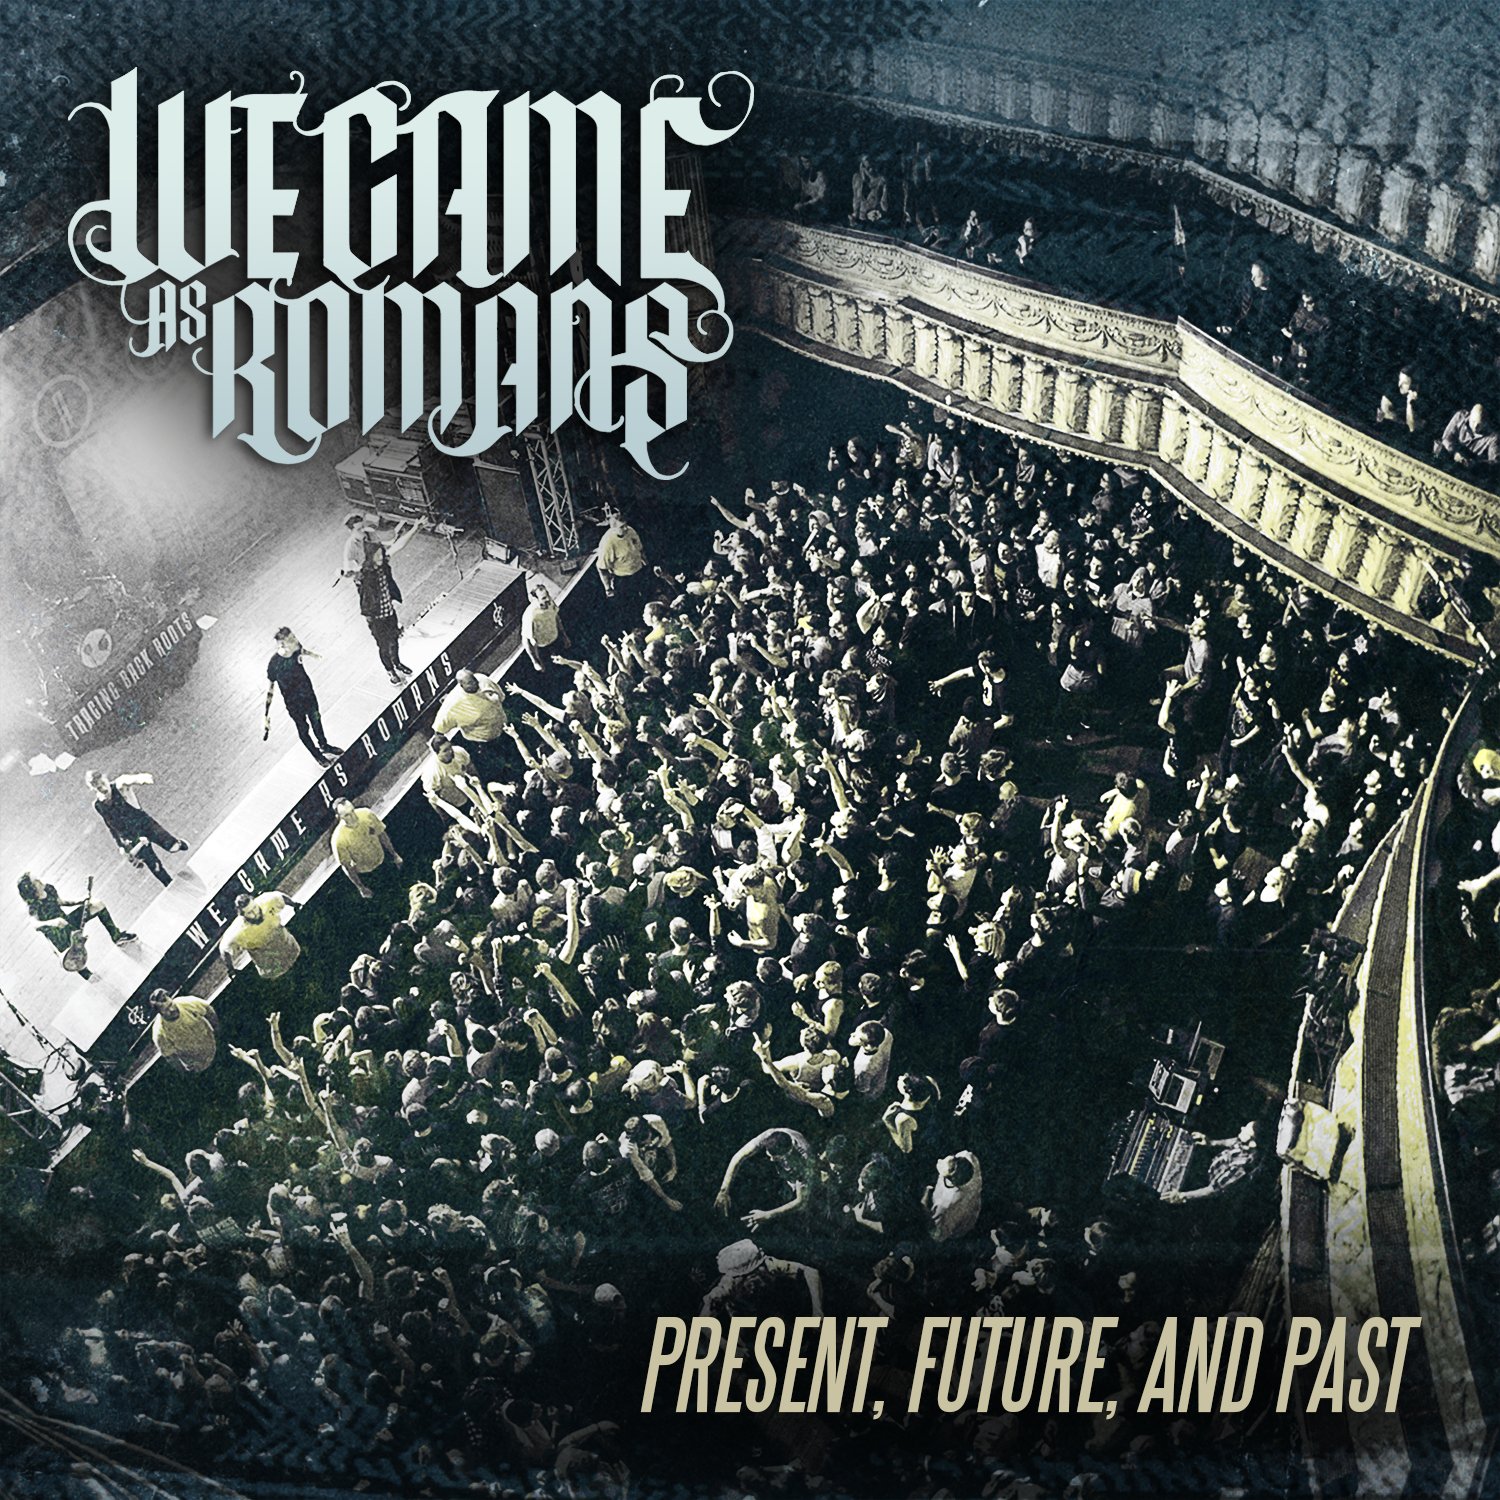 Never live in the past. We came as Romans обложка. Концерт группы we came as Romans 27112015. We came as Romans обои.